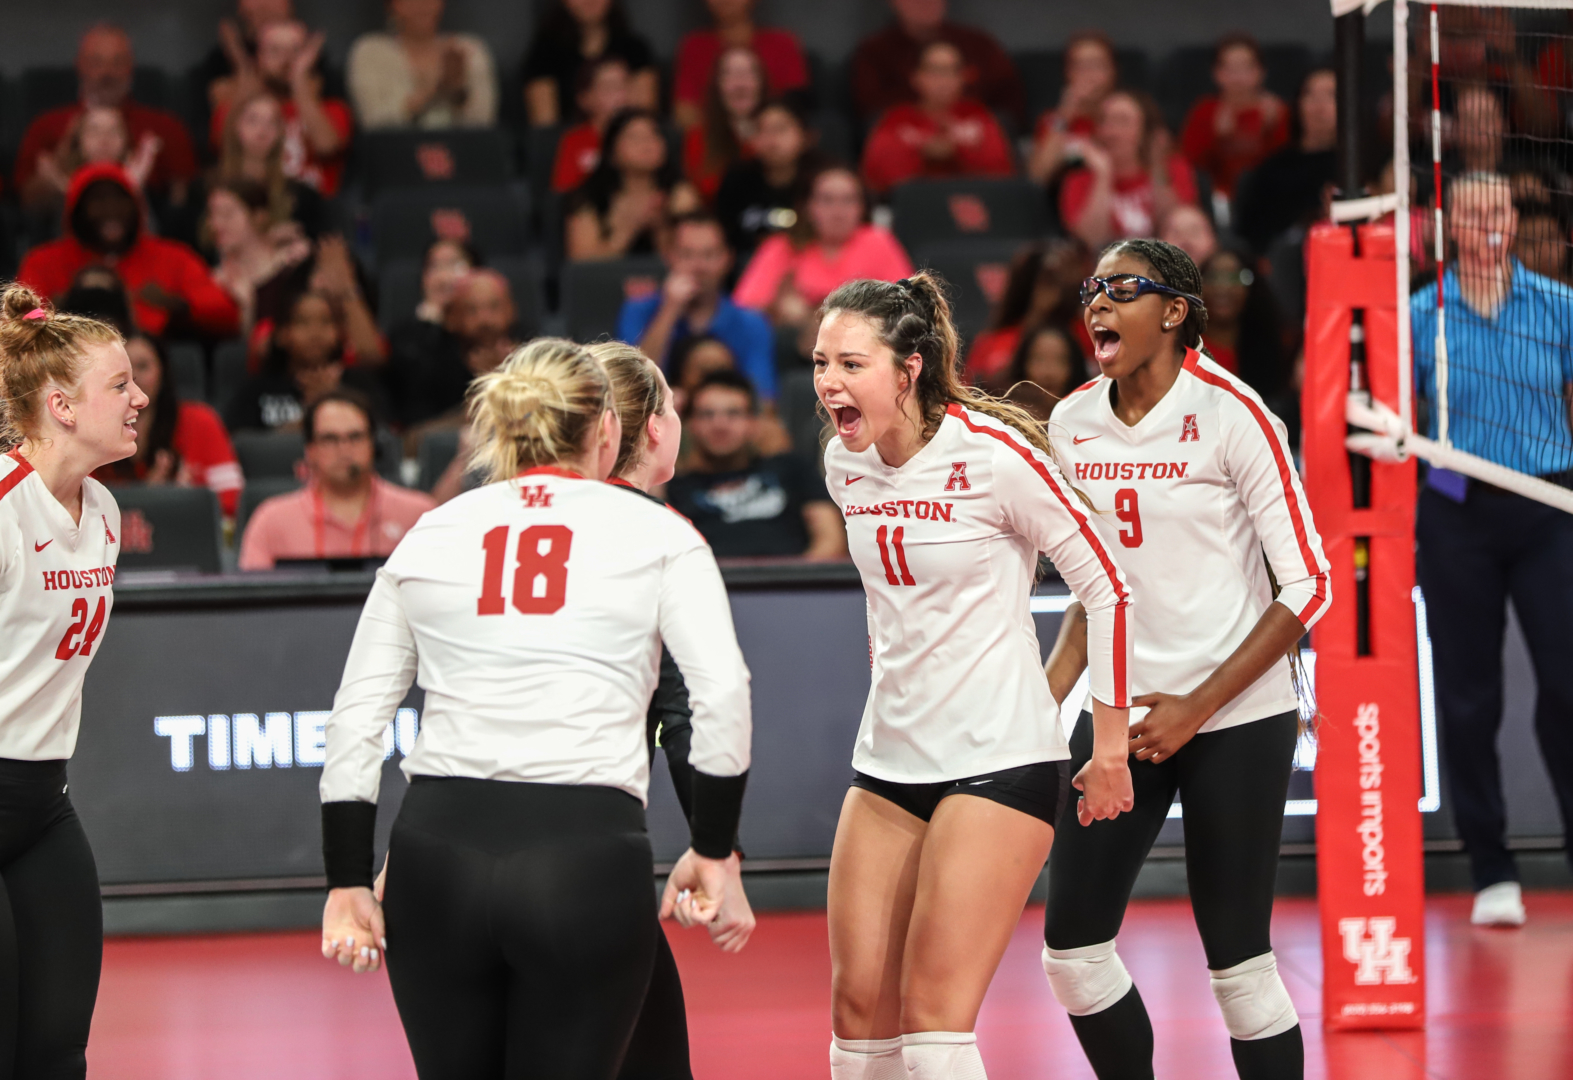 Ending its final season in the AAC as conference co-champions, UH volleyball is headed to the NCAA Tournament for the first time since 2000. | Sean Thomas/The Cougar